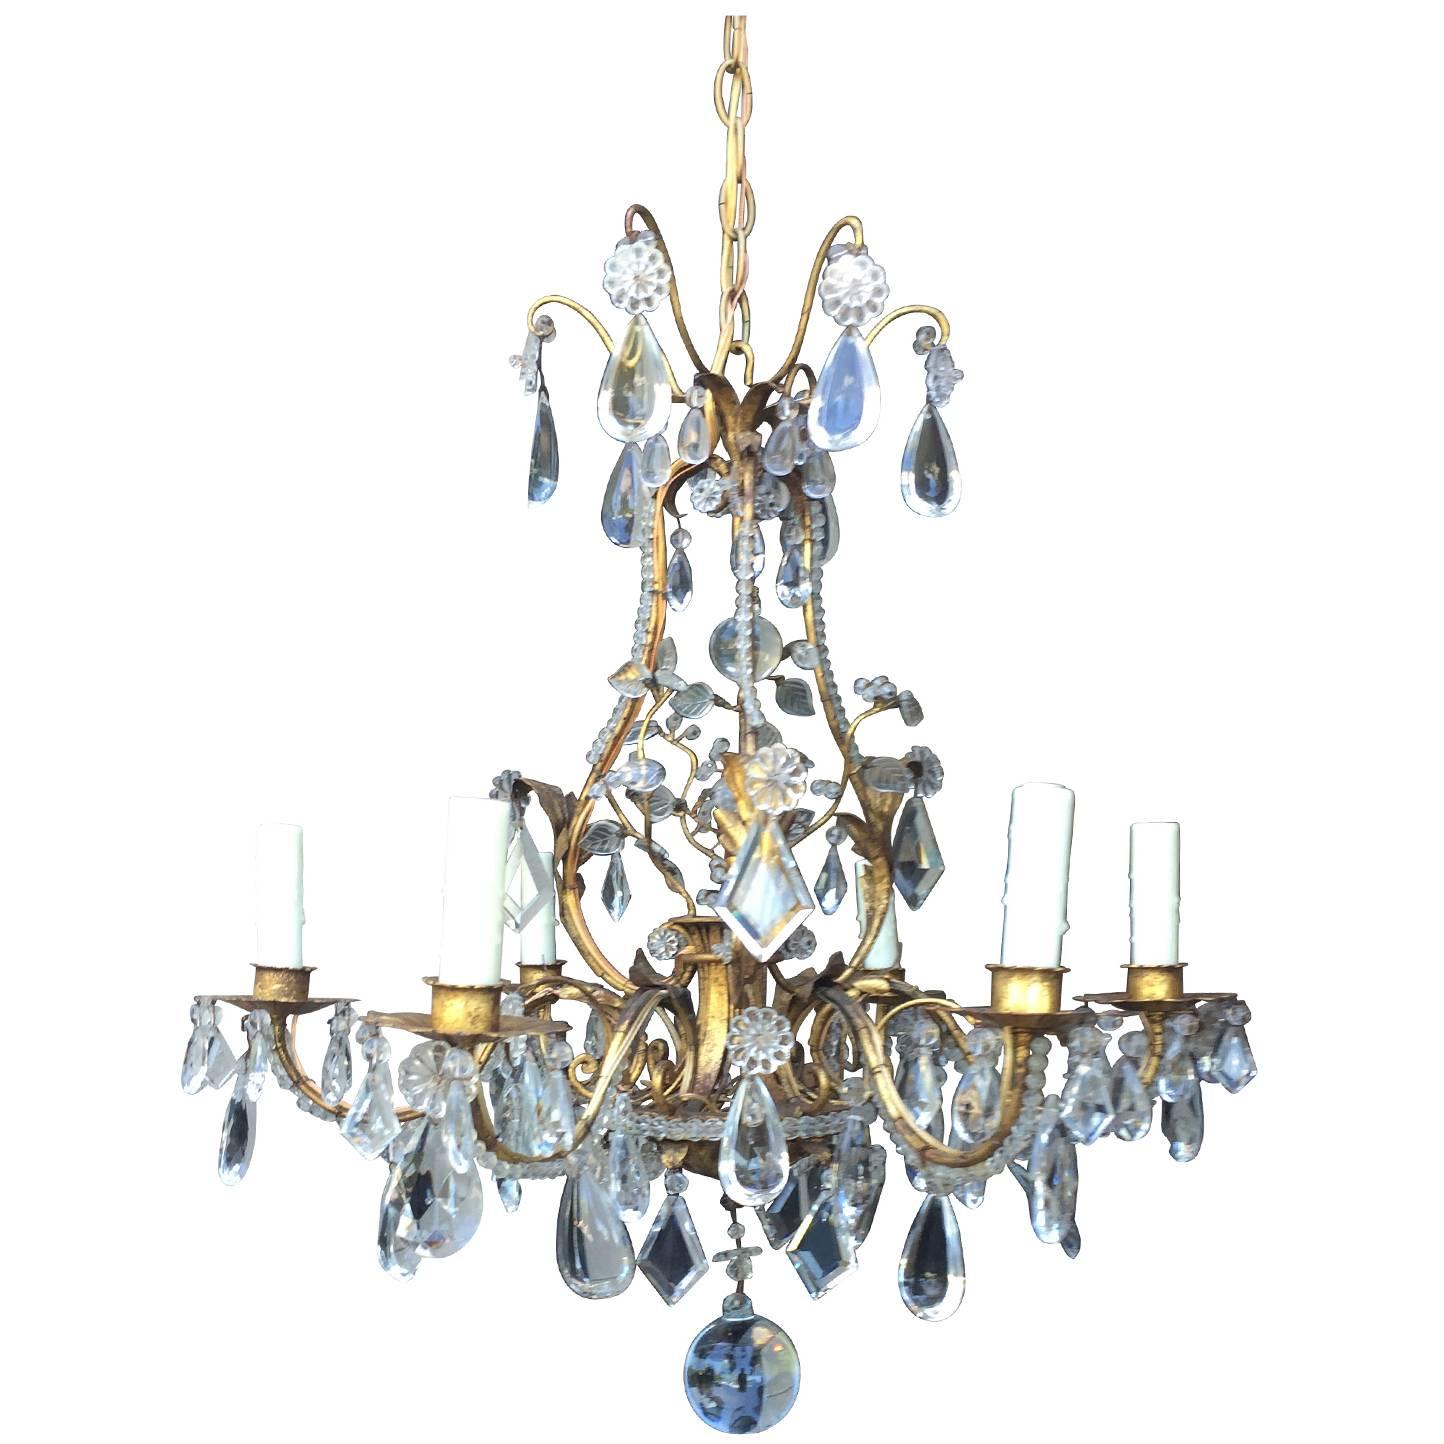 Early 20th Century Italian Crystal and Gilt Metal Chandelier